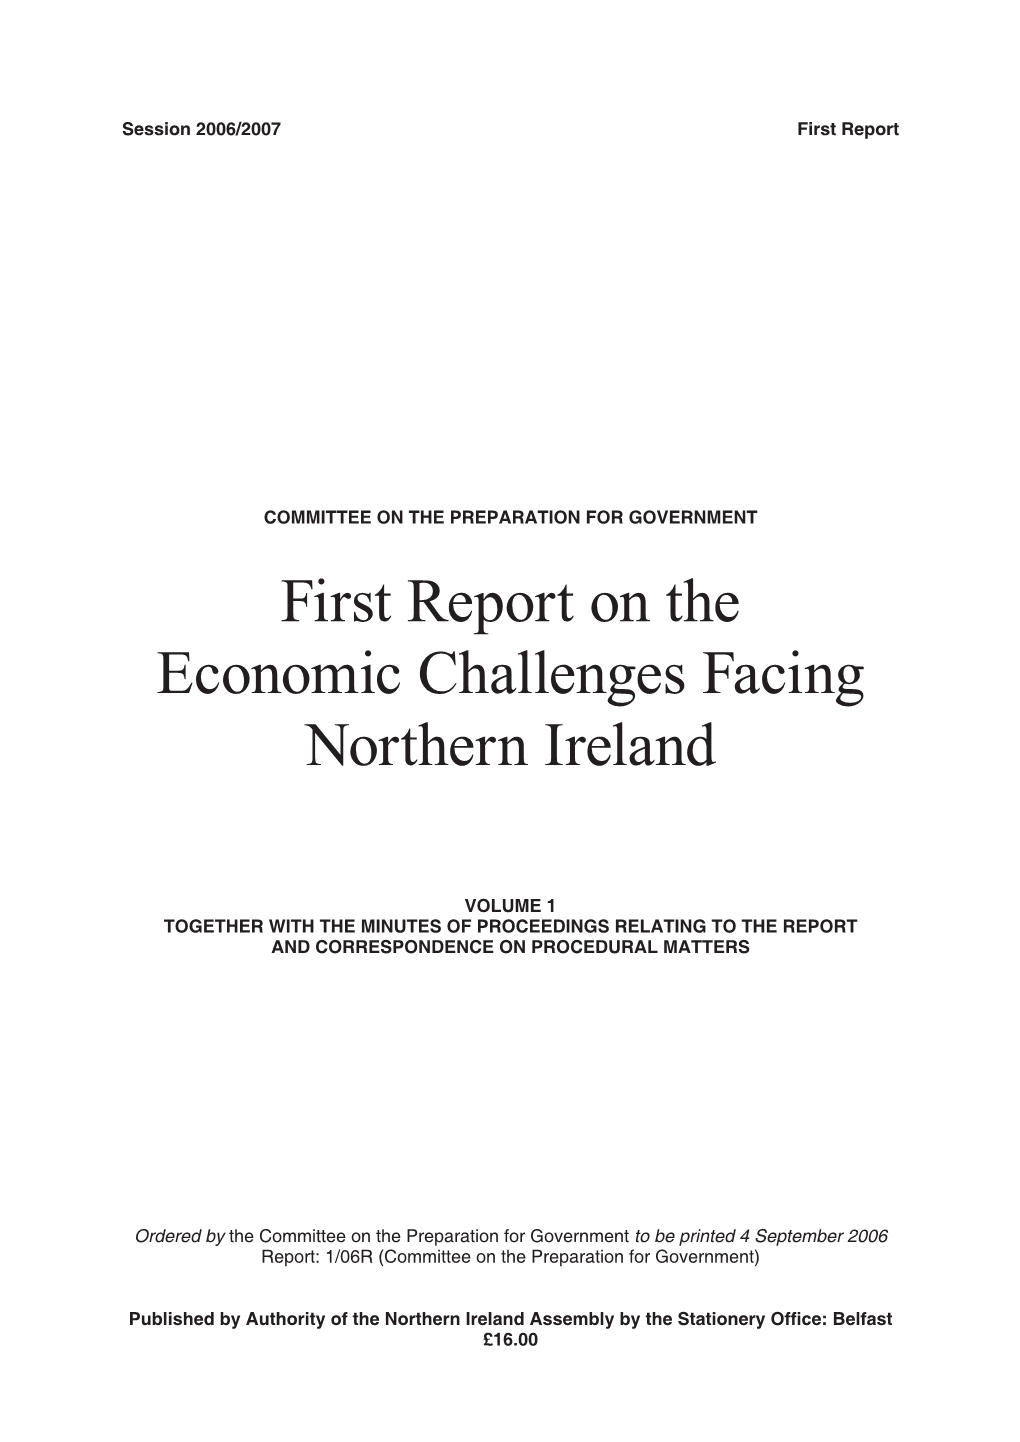 First Report on the Economic Challenges Facing Northern Ireland